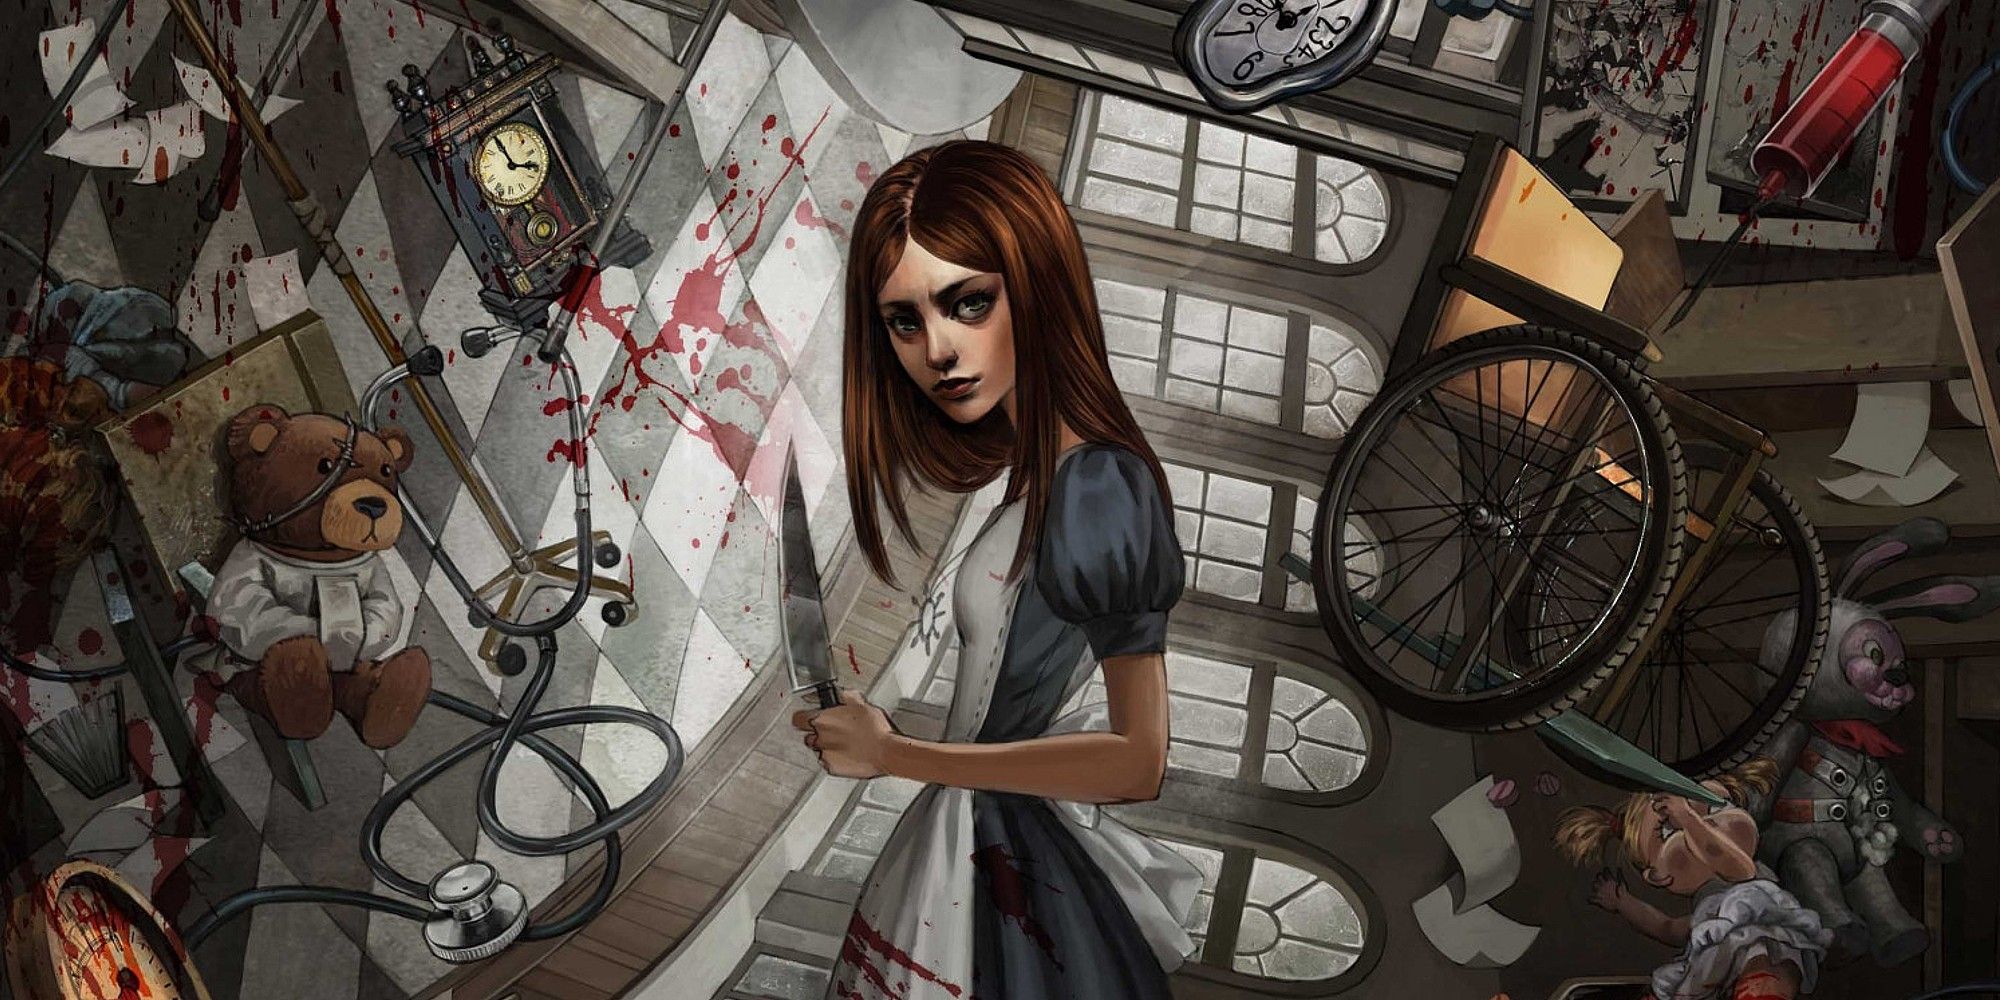 EA Refuses to Fund American McGee's Next Alice Game